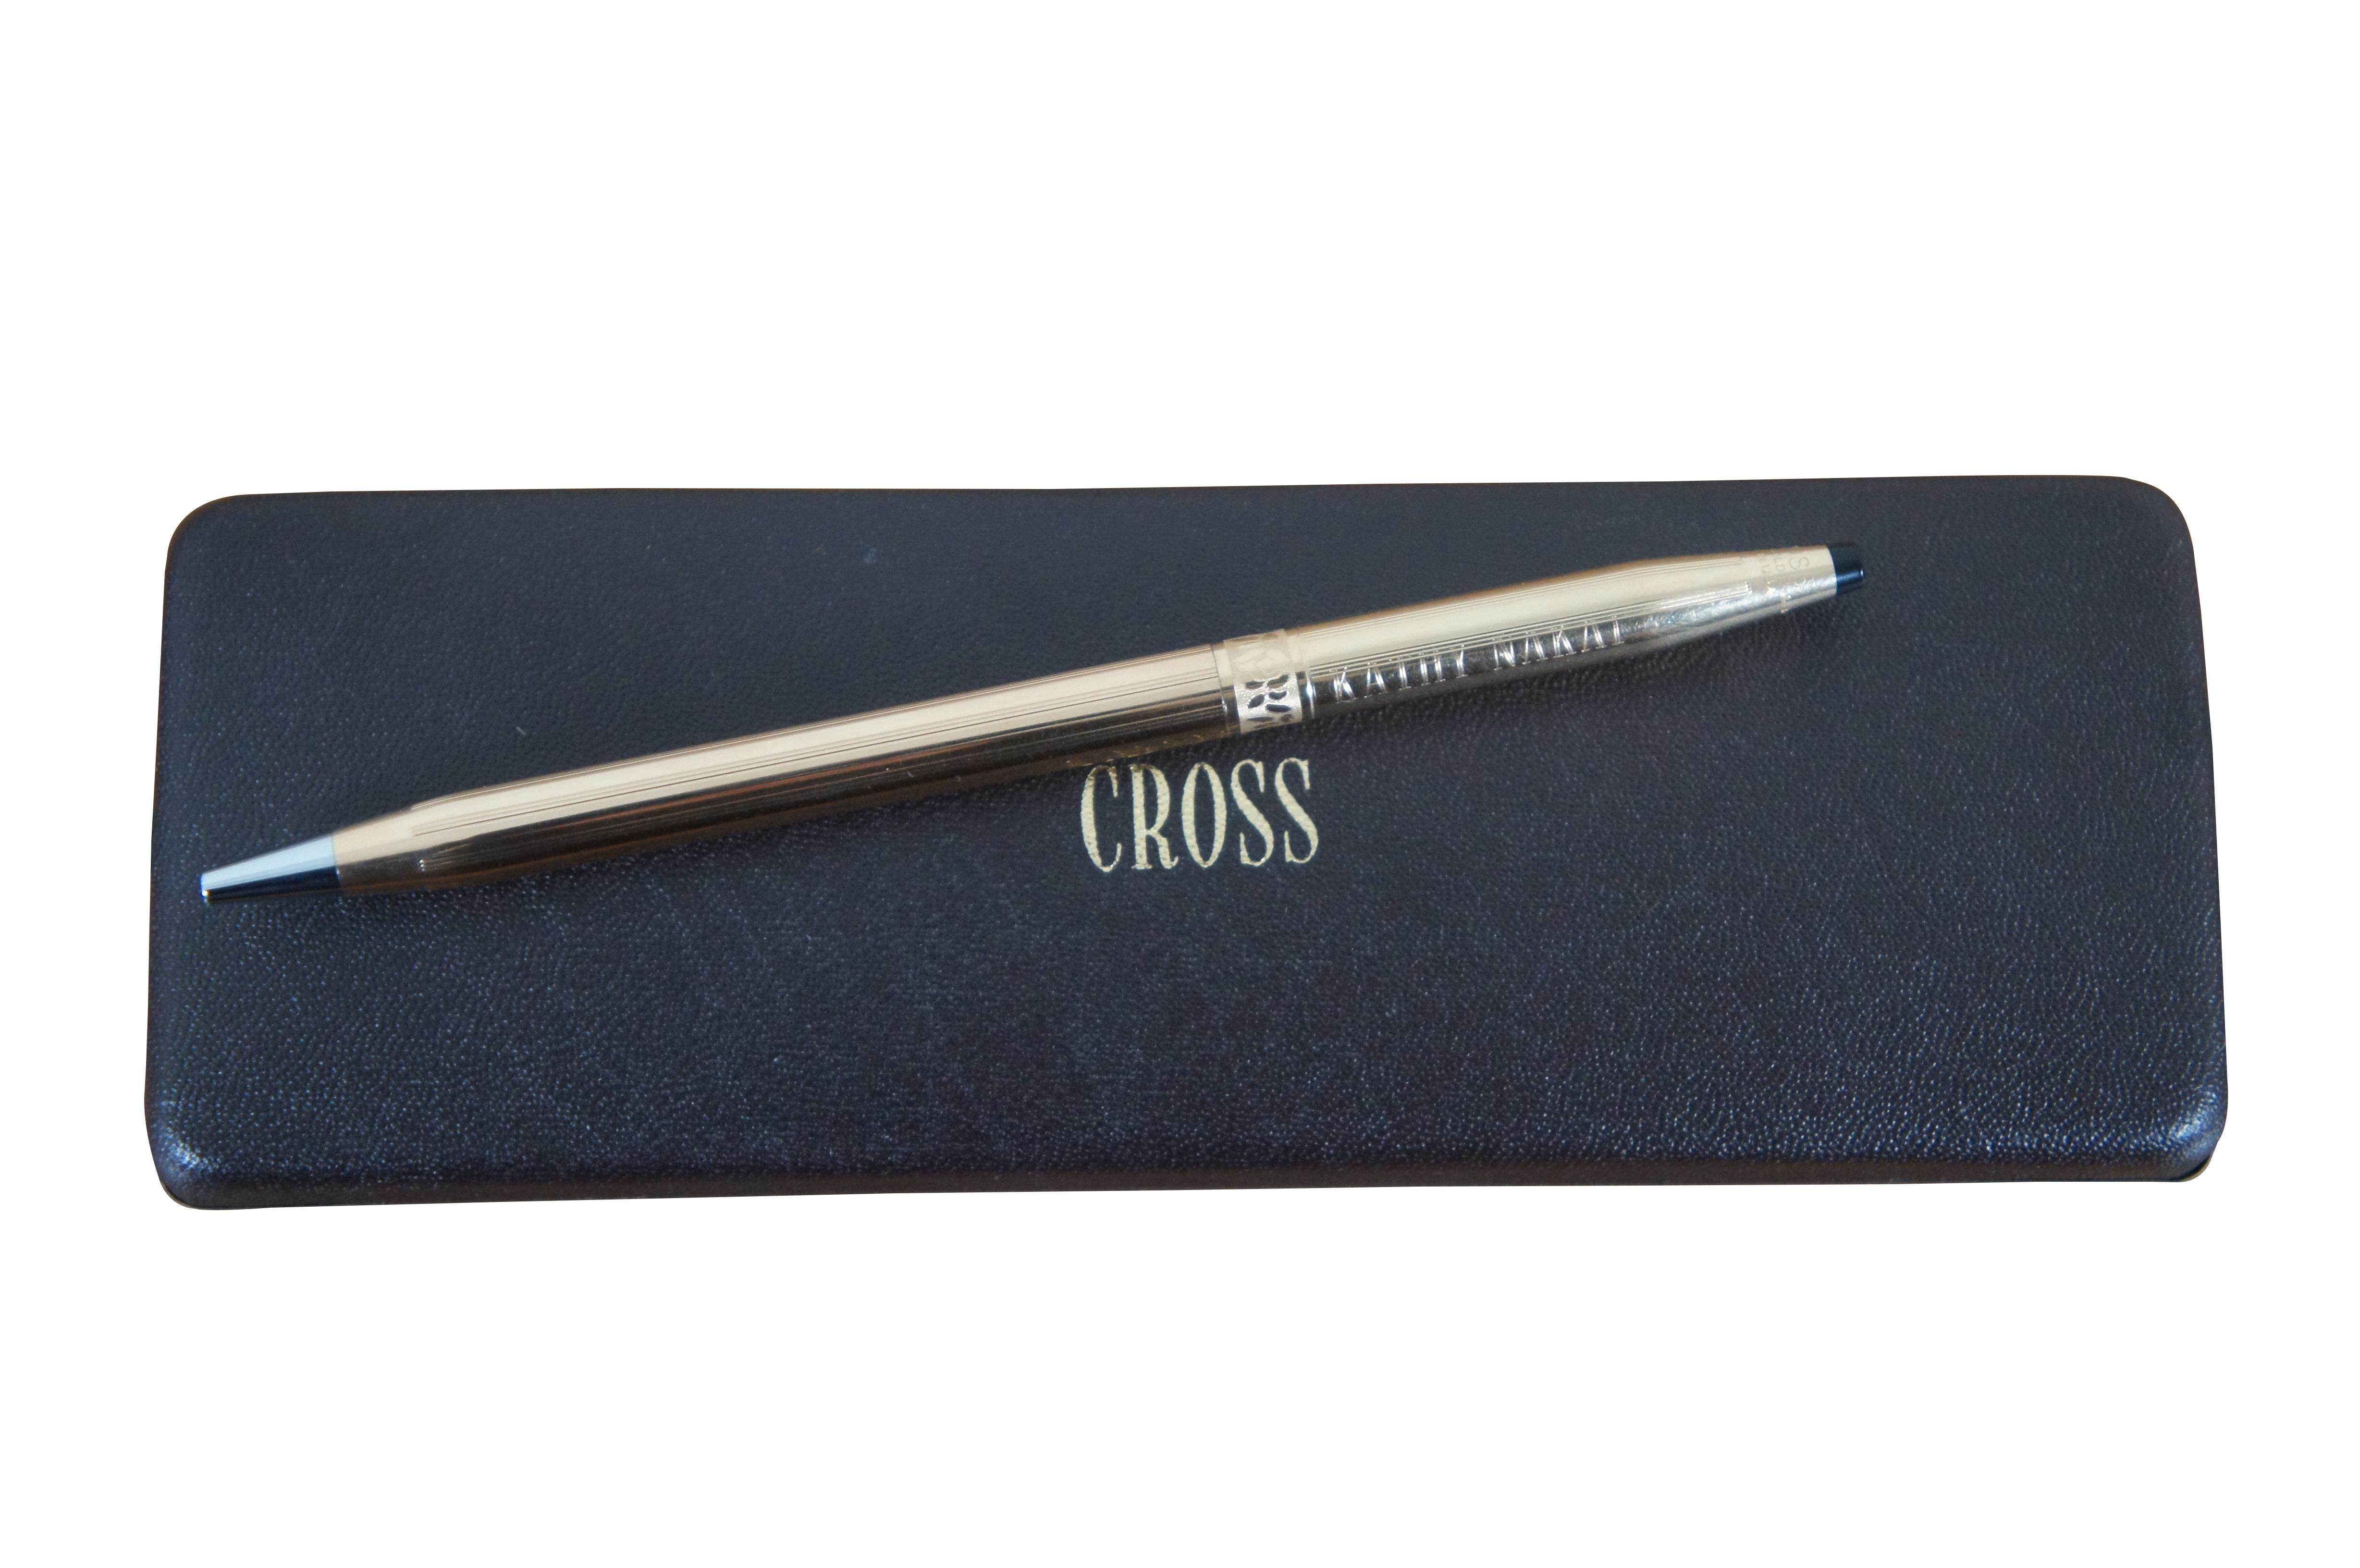 Vintage A.T. Cross refillable 1/20 14K gold filled ballpoint pen featuring a detail band of flowers / roses. Made in USA. Includes original box, dust bag, and leather sleeve. Engraved with the name of original owner.

Dimensions:
0.25